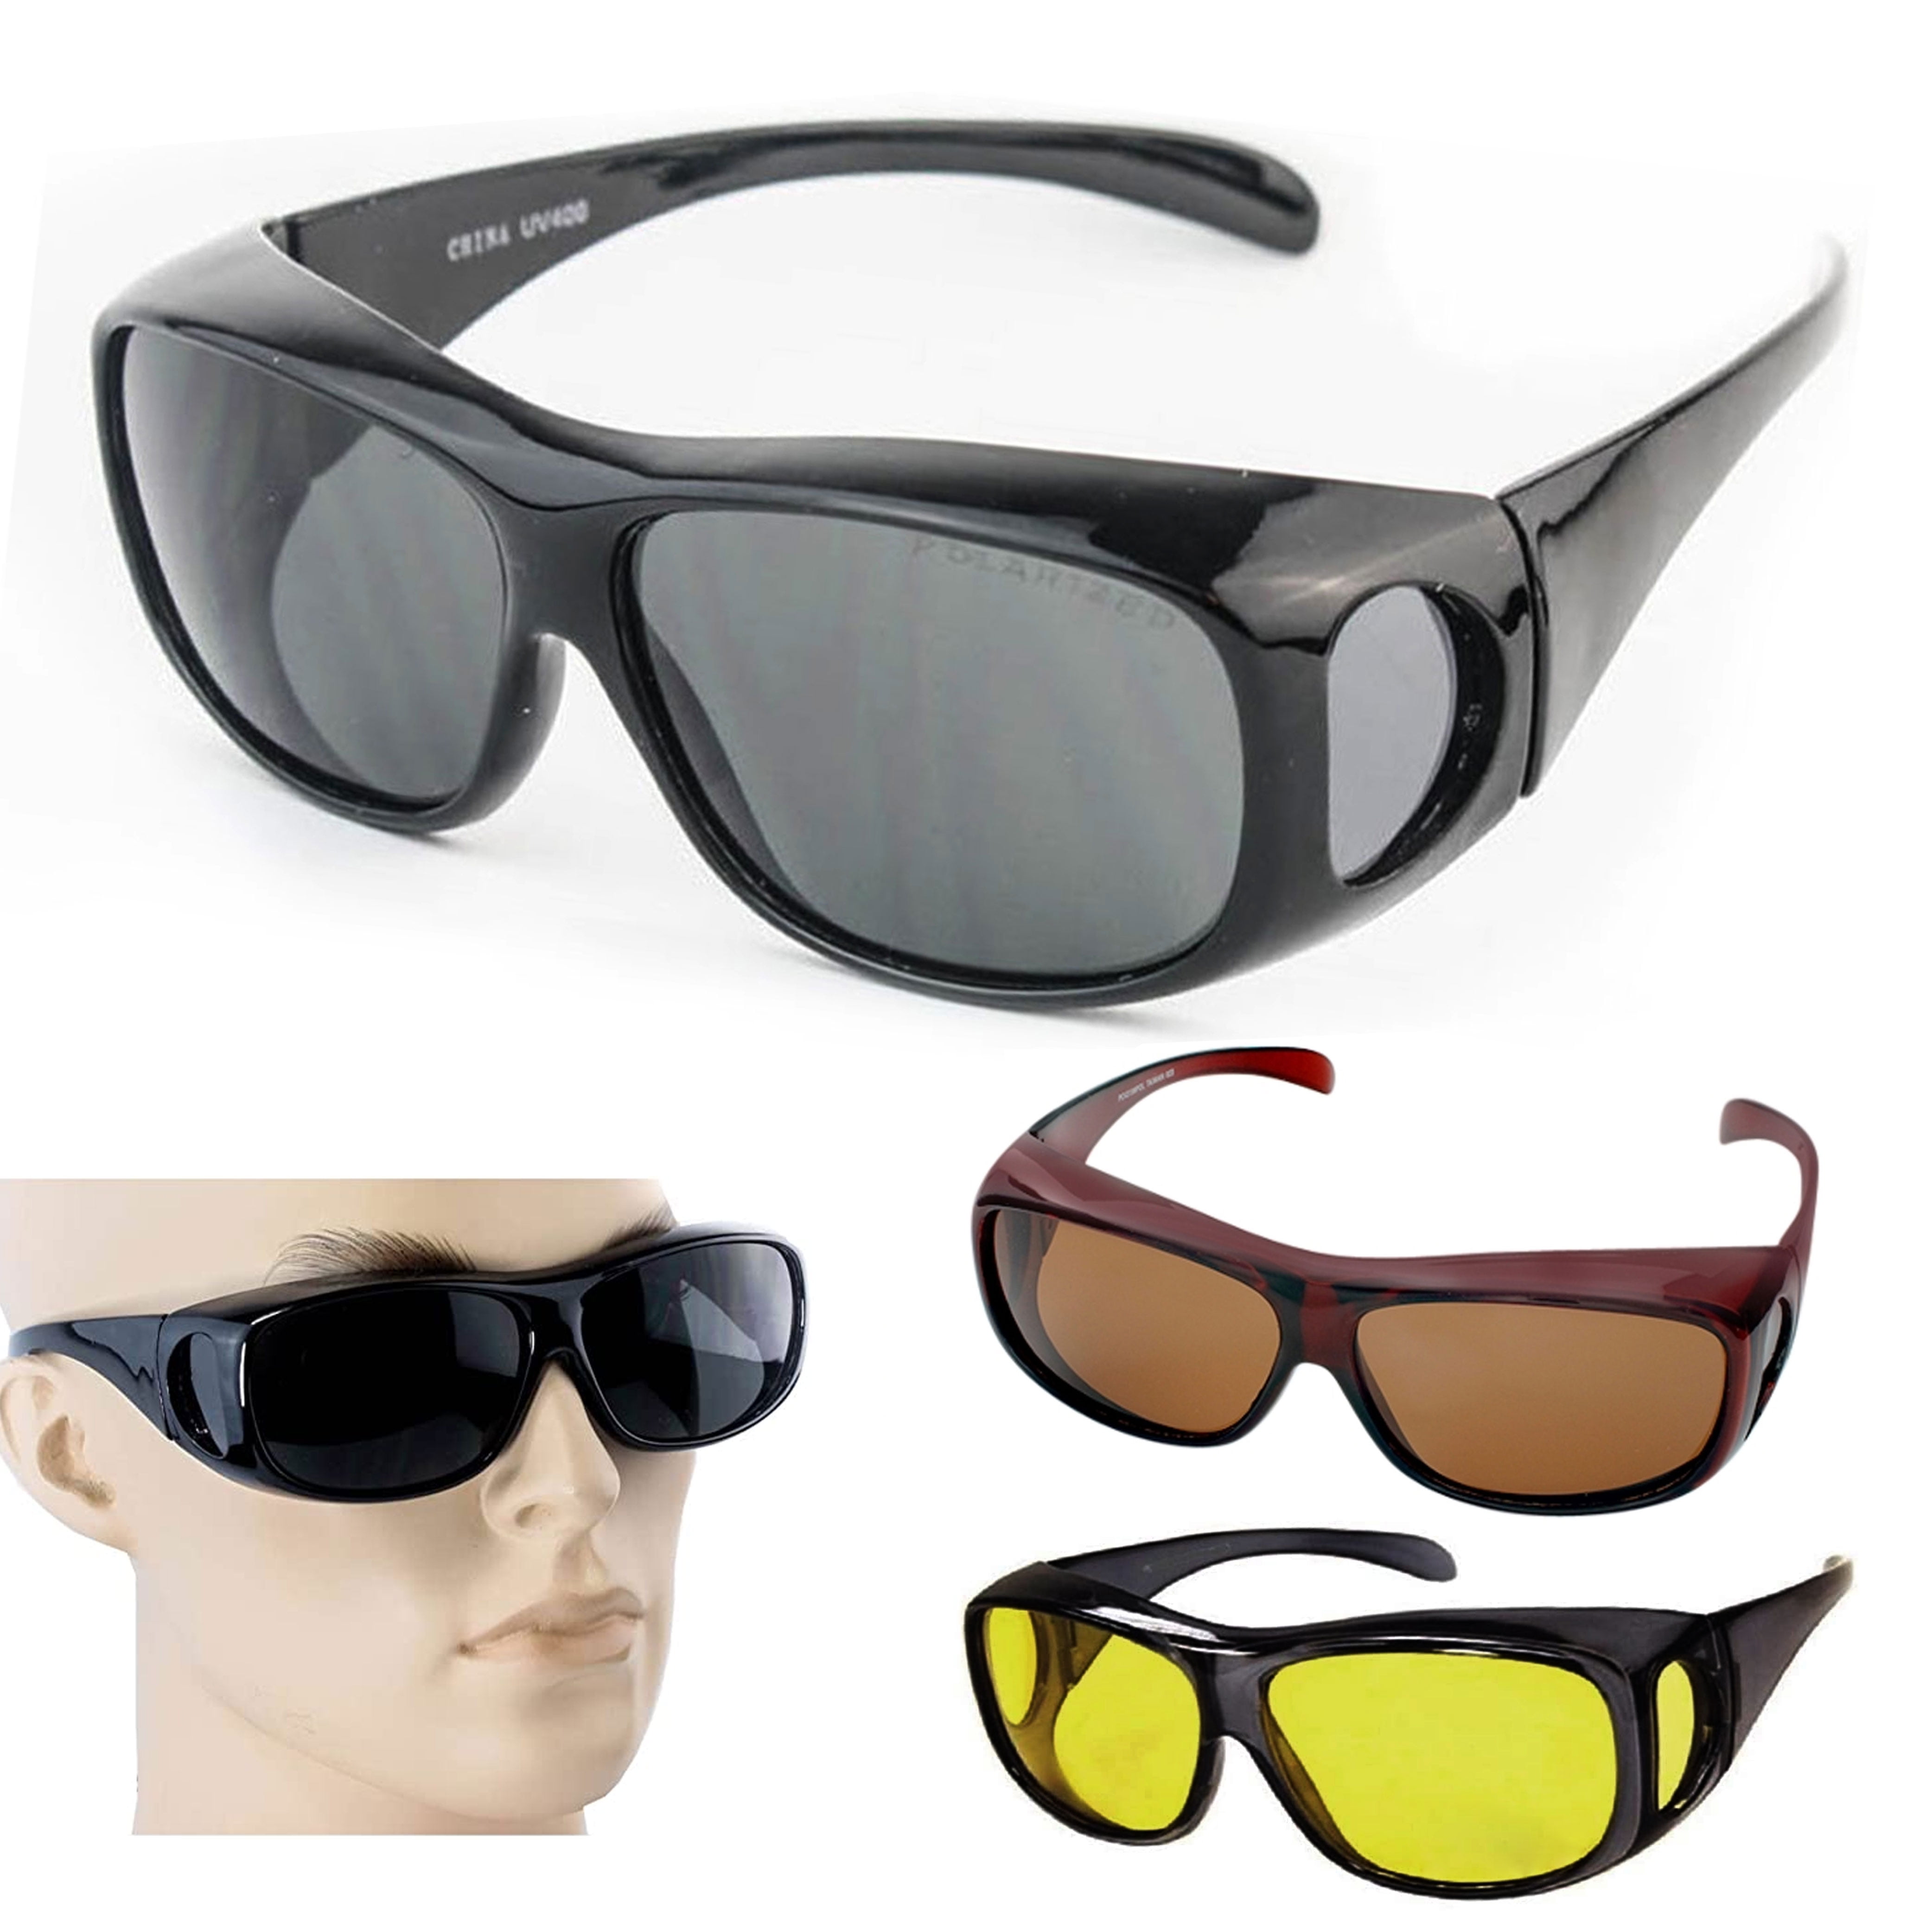 Leather Sunglasses Cover - Leather Sunglasses Case Manufacturer from Mumbai-nttc.com.vn